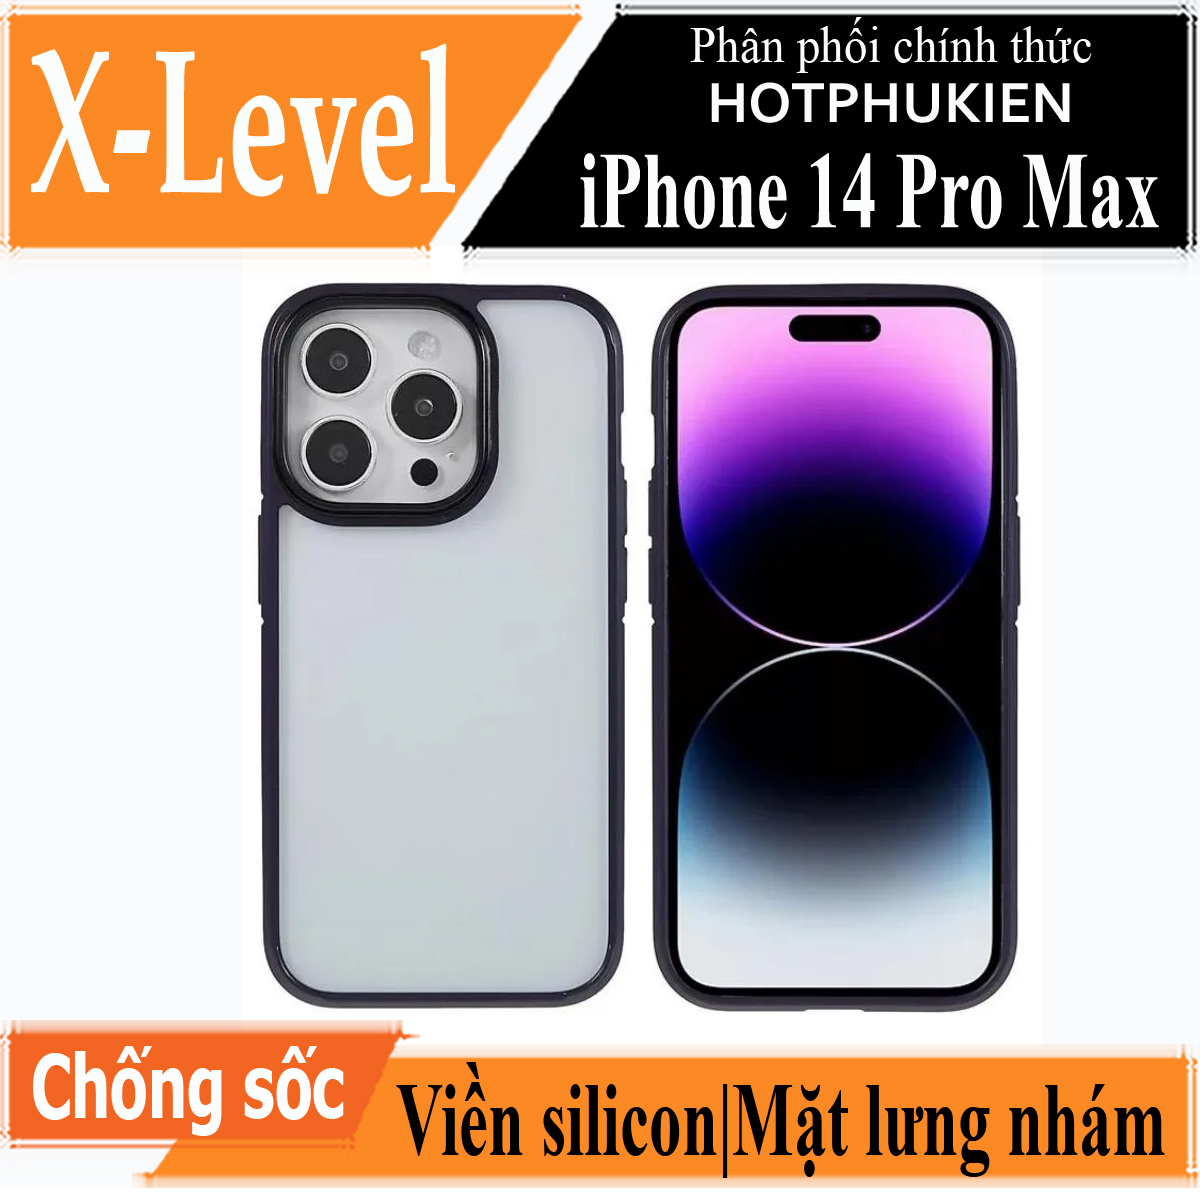 Ốp lưng nhám chống sốc viền silicon cho iPhone 14 Pro Max (6.7 inch) hiệu X-Level Frosted Sand Case